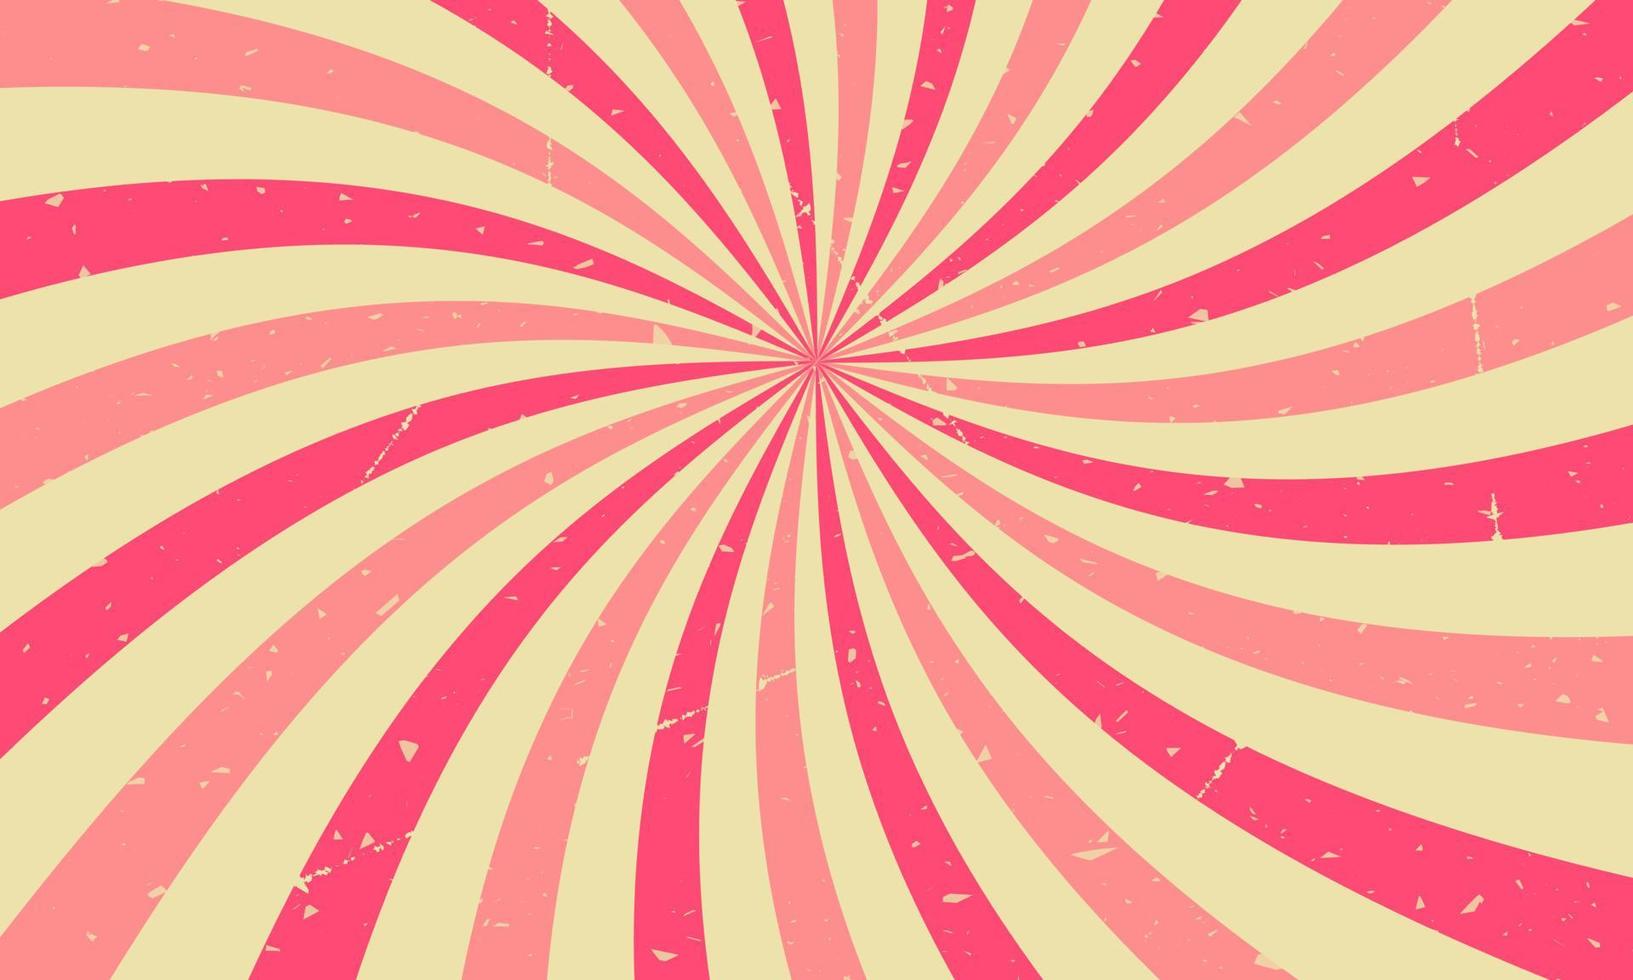 Pink vintage background with lines vector